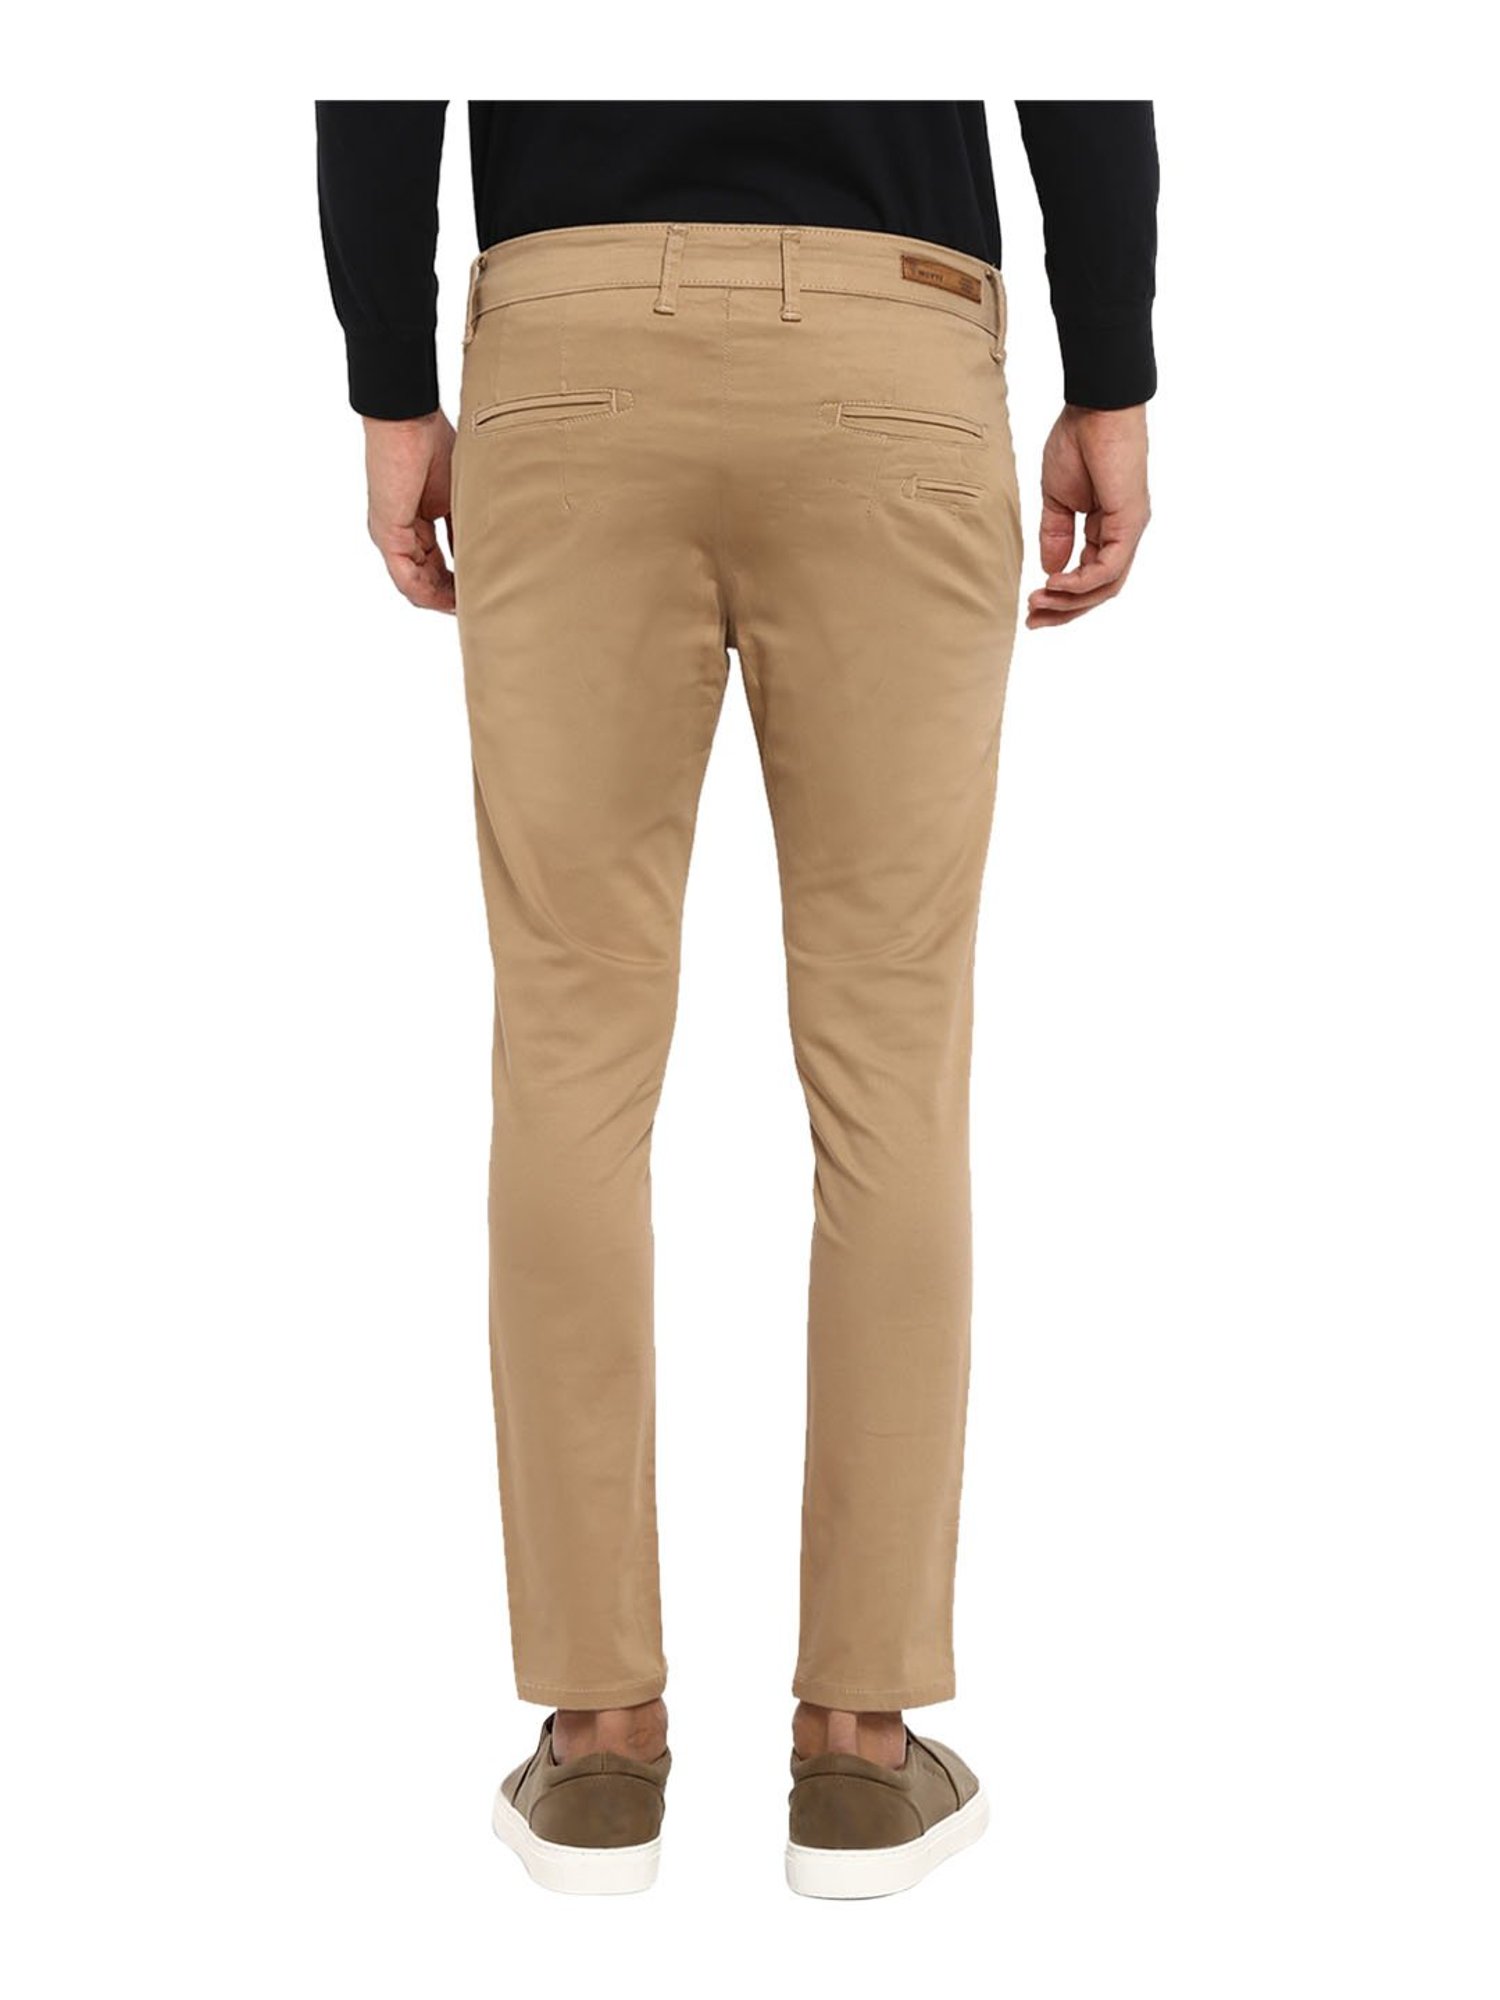 Buy MUFTI Mens Slim Fit Solid Trousers | Shoppers Stop